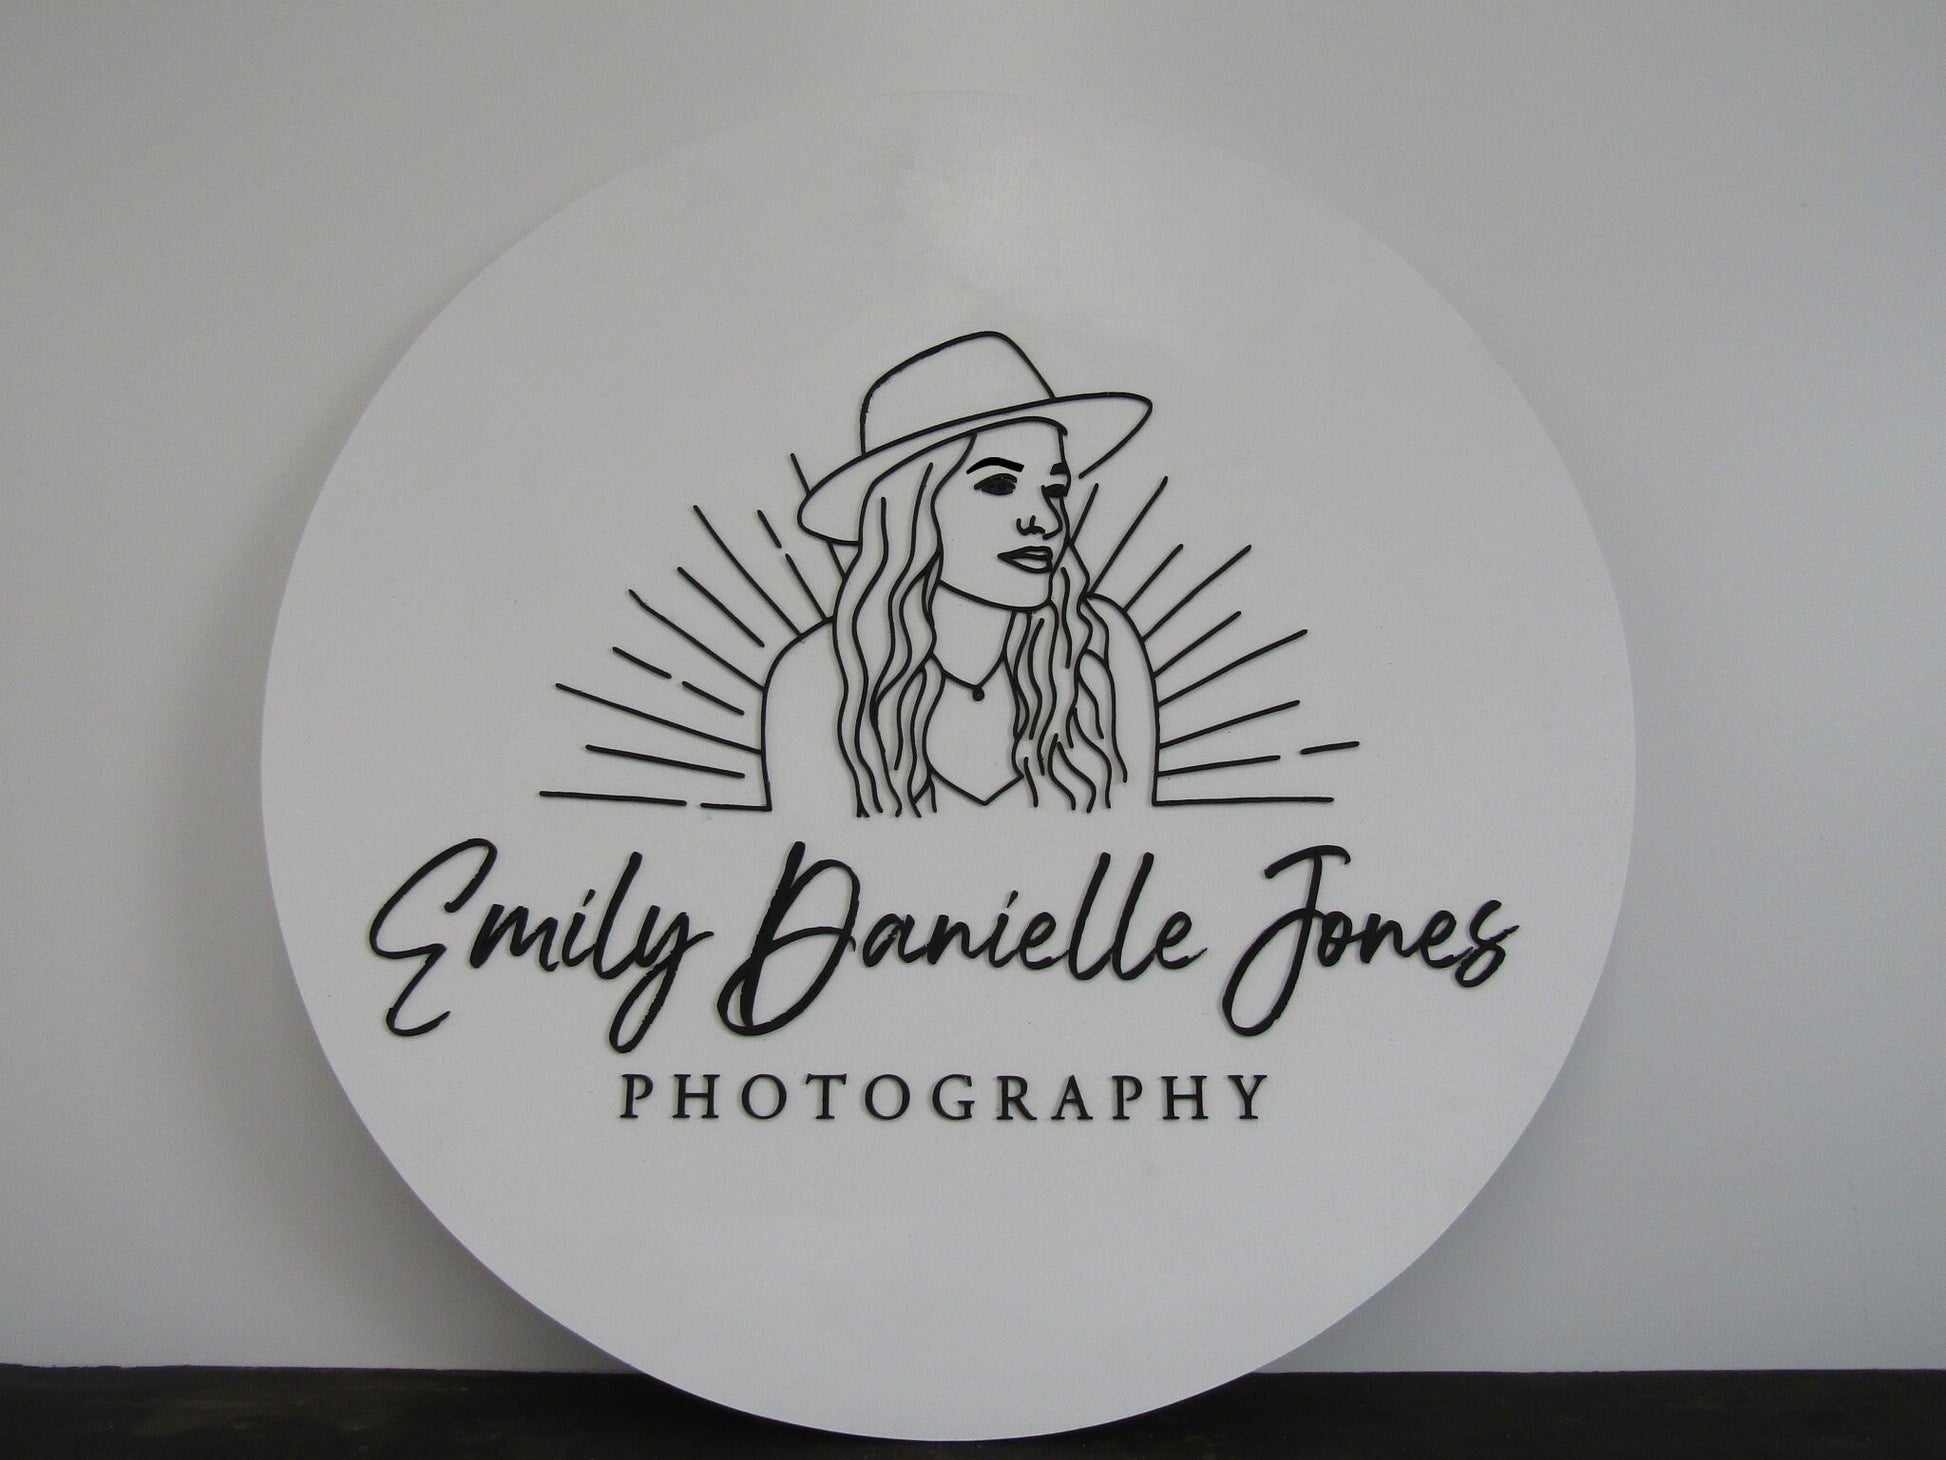 Custom Sign Round Business Commerical Signage Minimalist Made to Order Photography Studio Front Small Shop Logo Circle Wooden Handmade